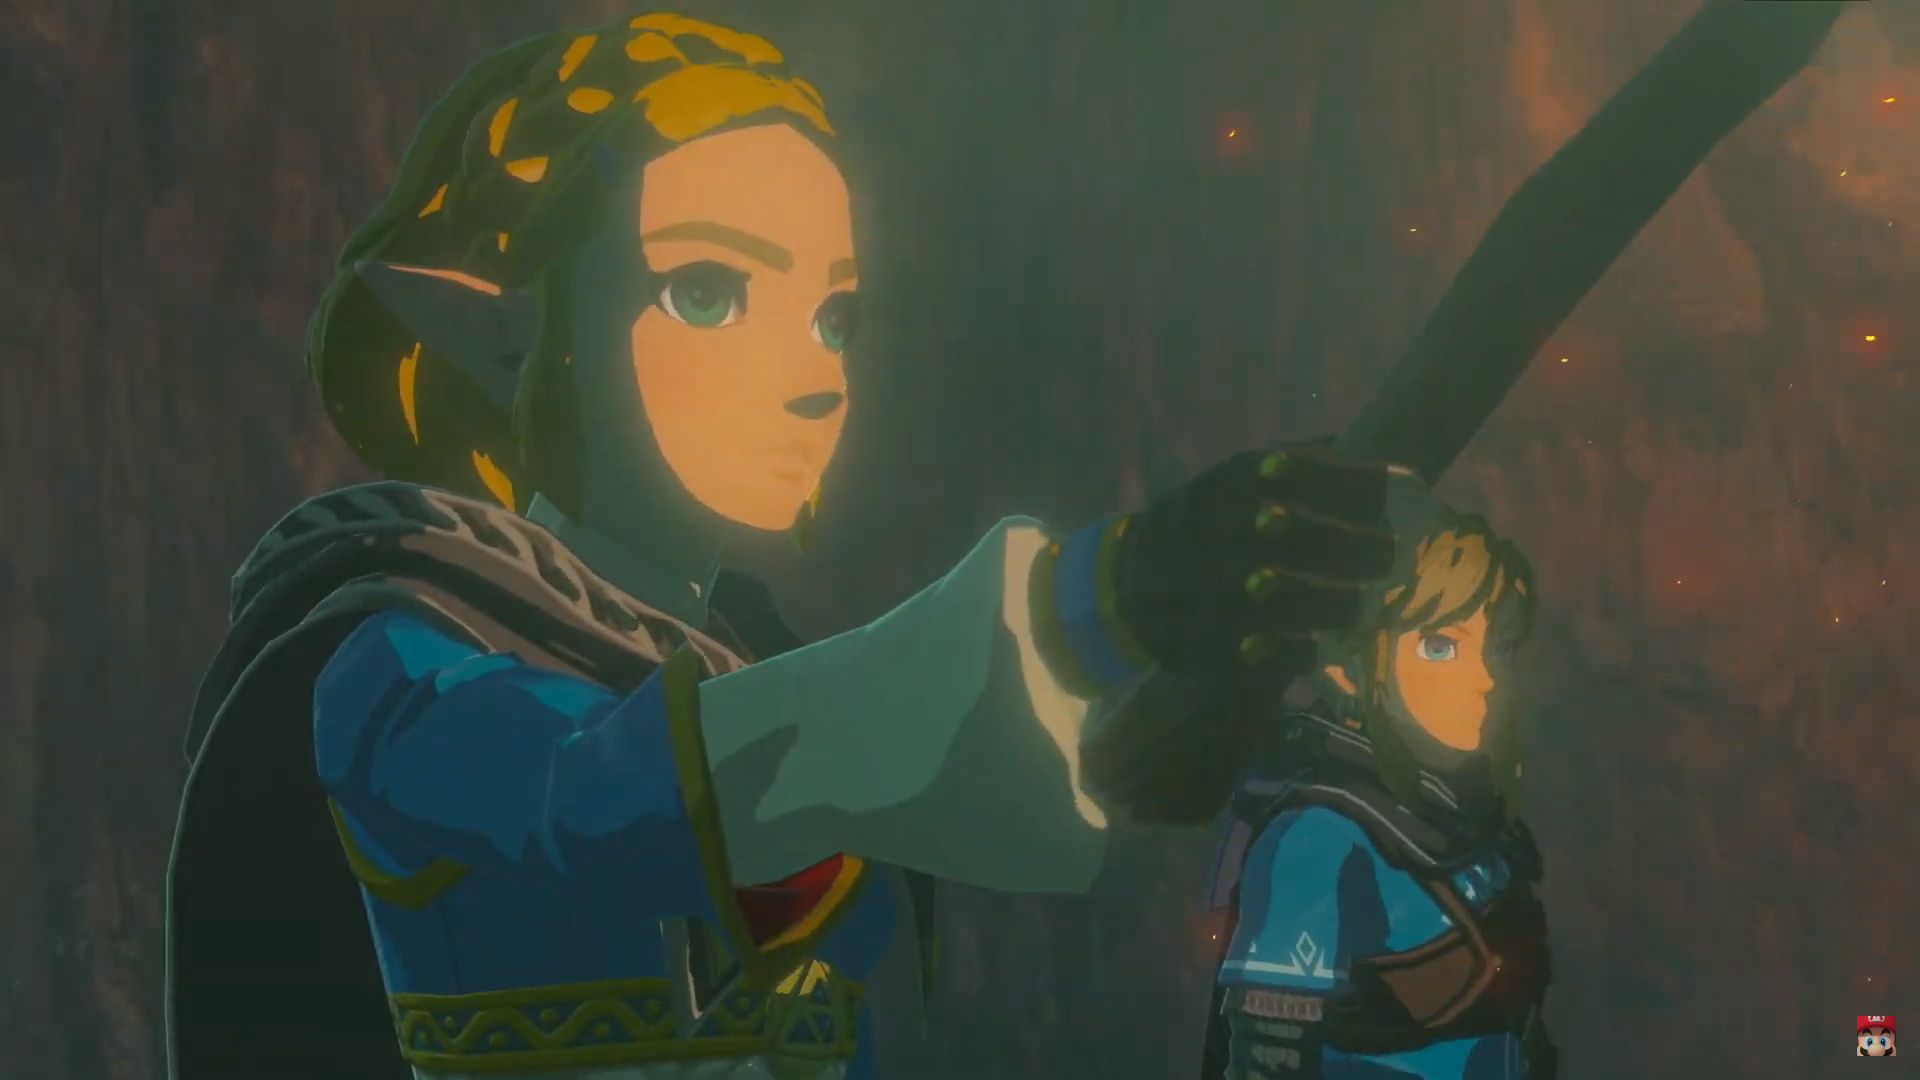 Breath of the Wild Sequel Confirmed to be in Development